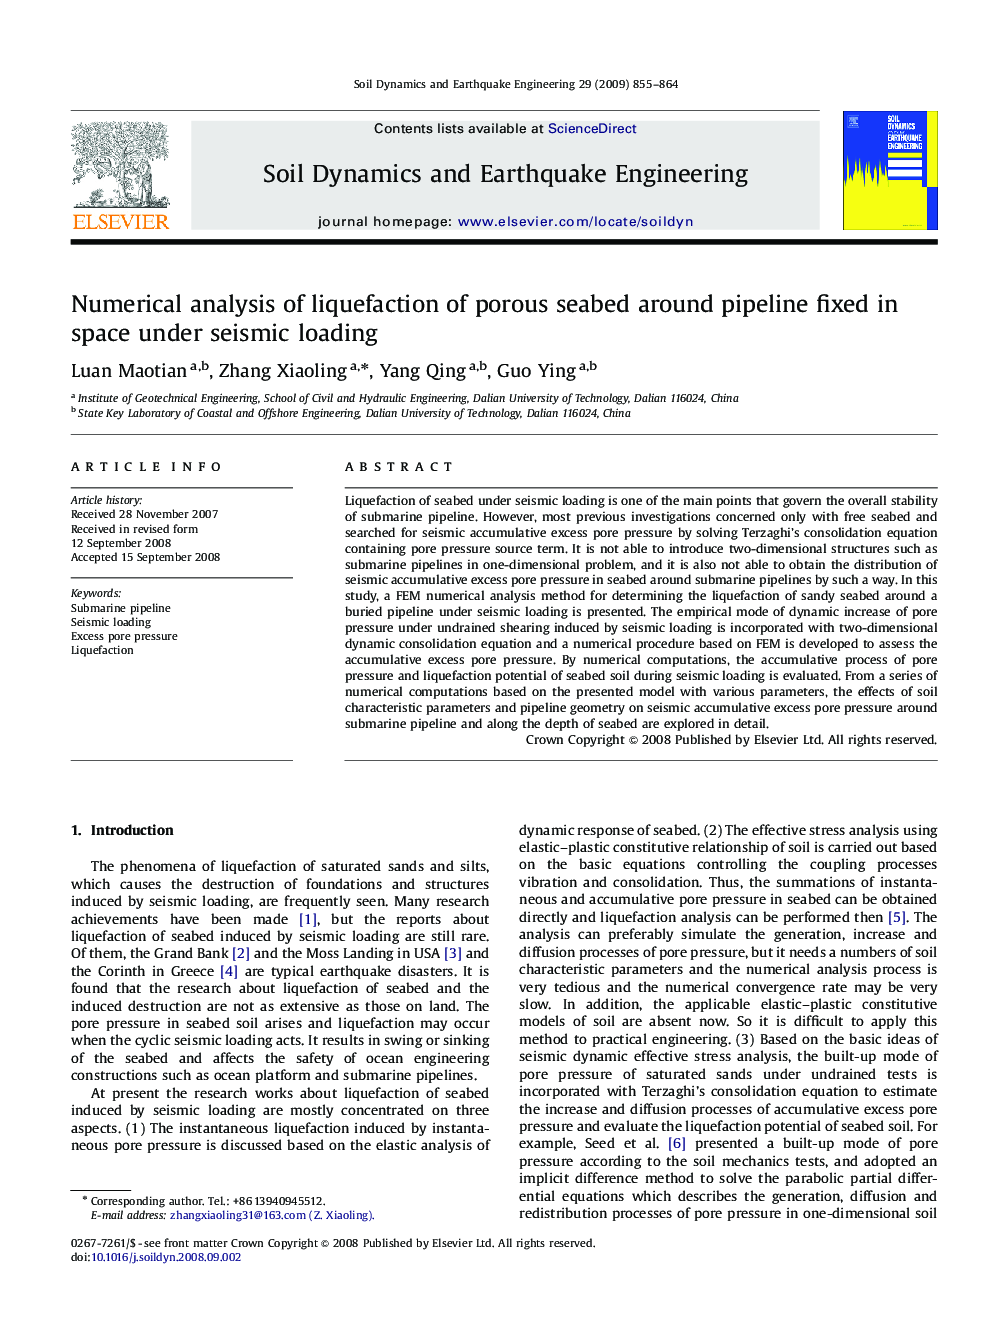 Numerical analysis of liquefaction of porous seabed around pipeline fixed in space under seismic loading